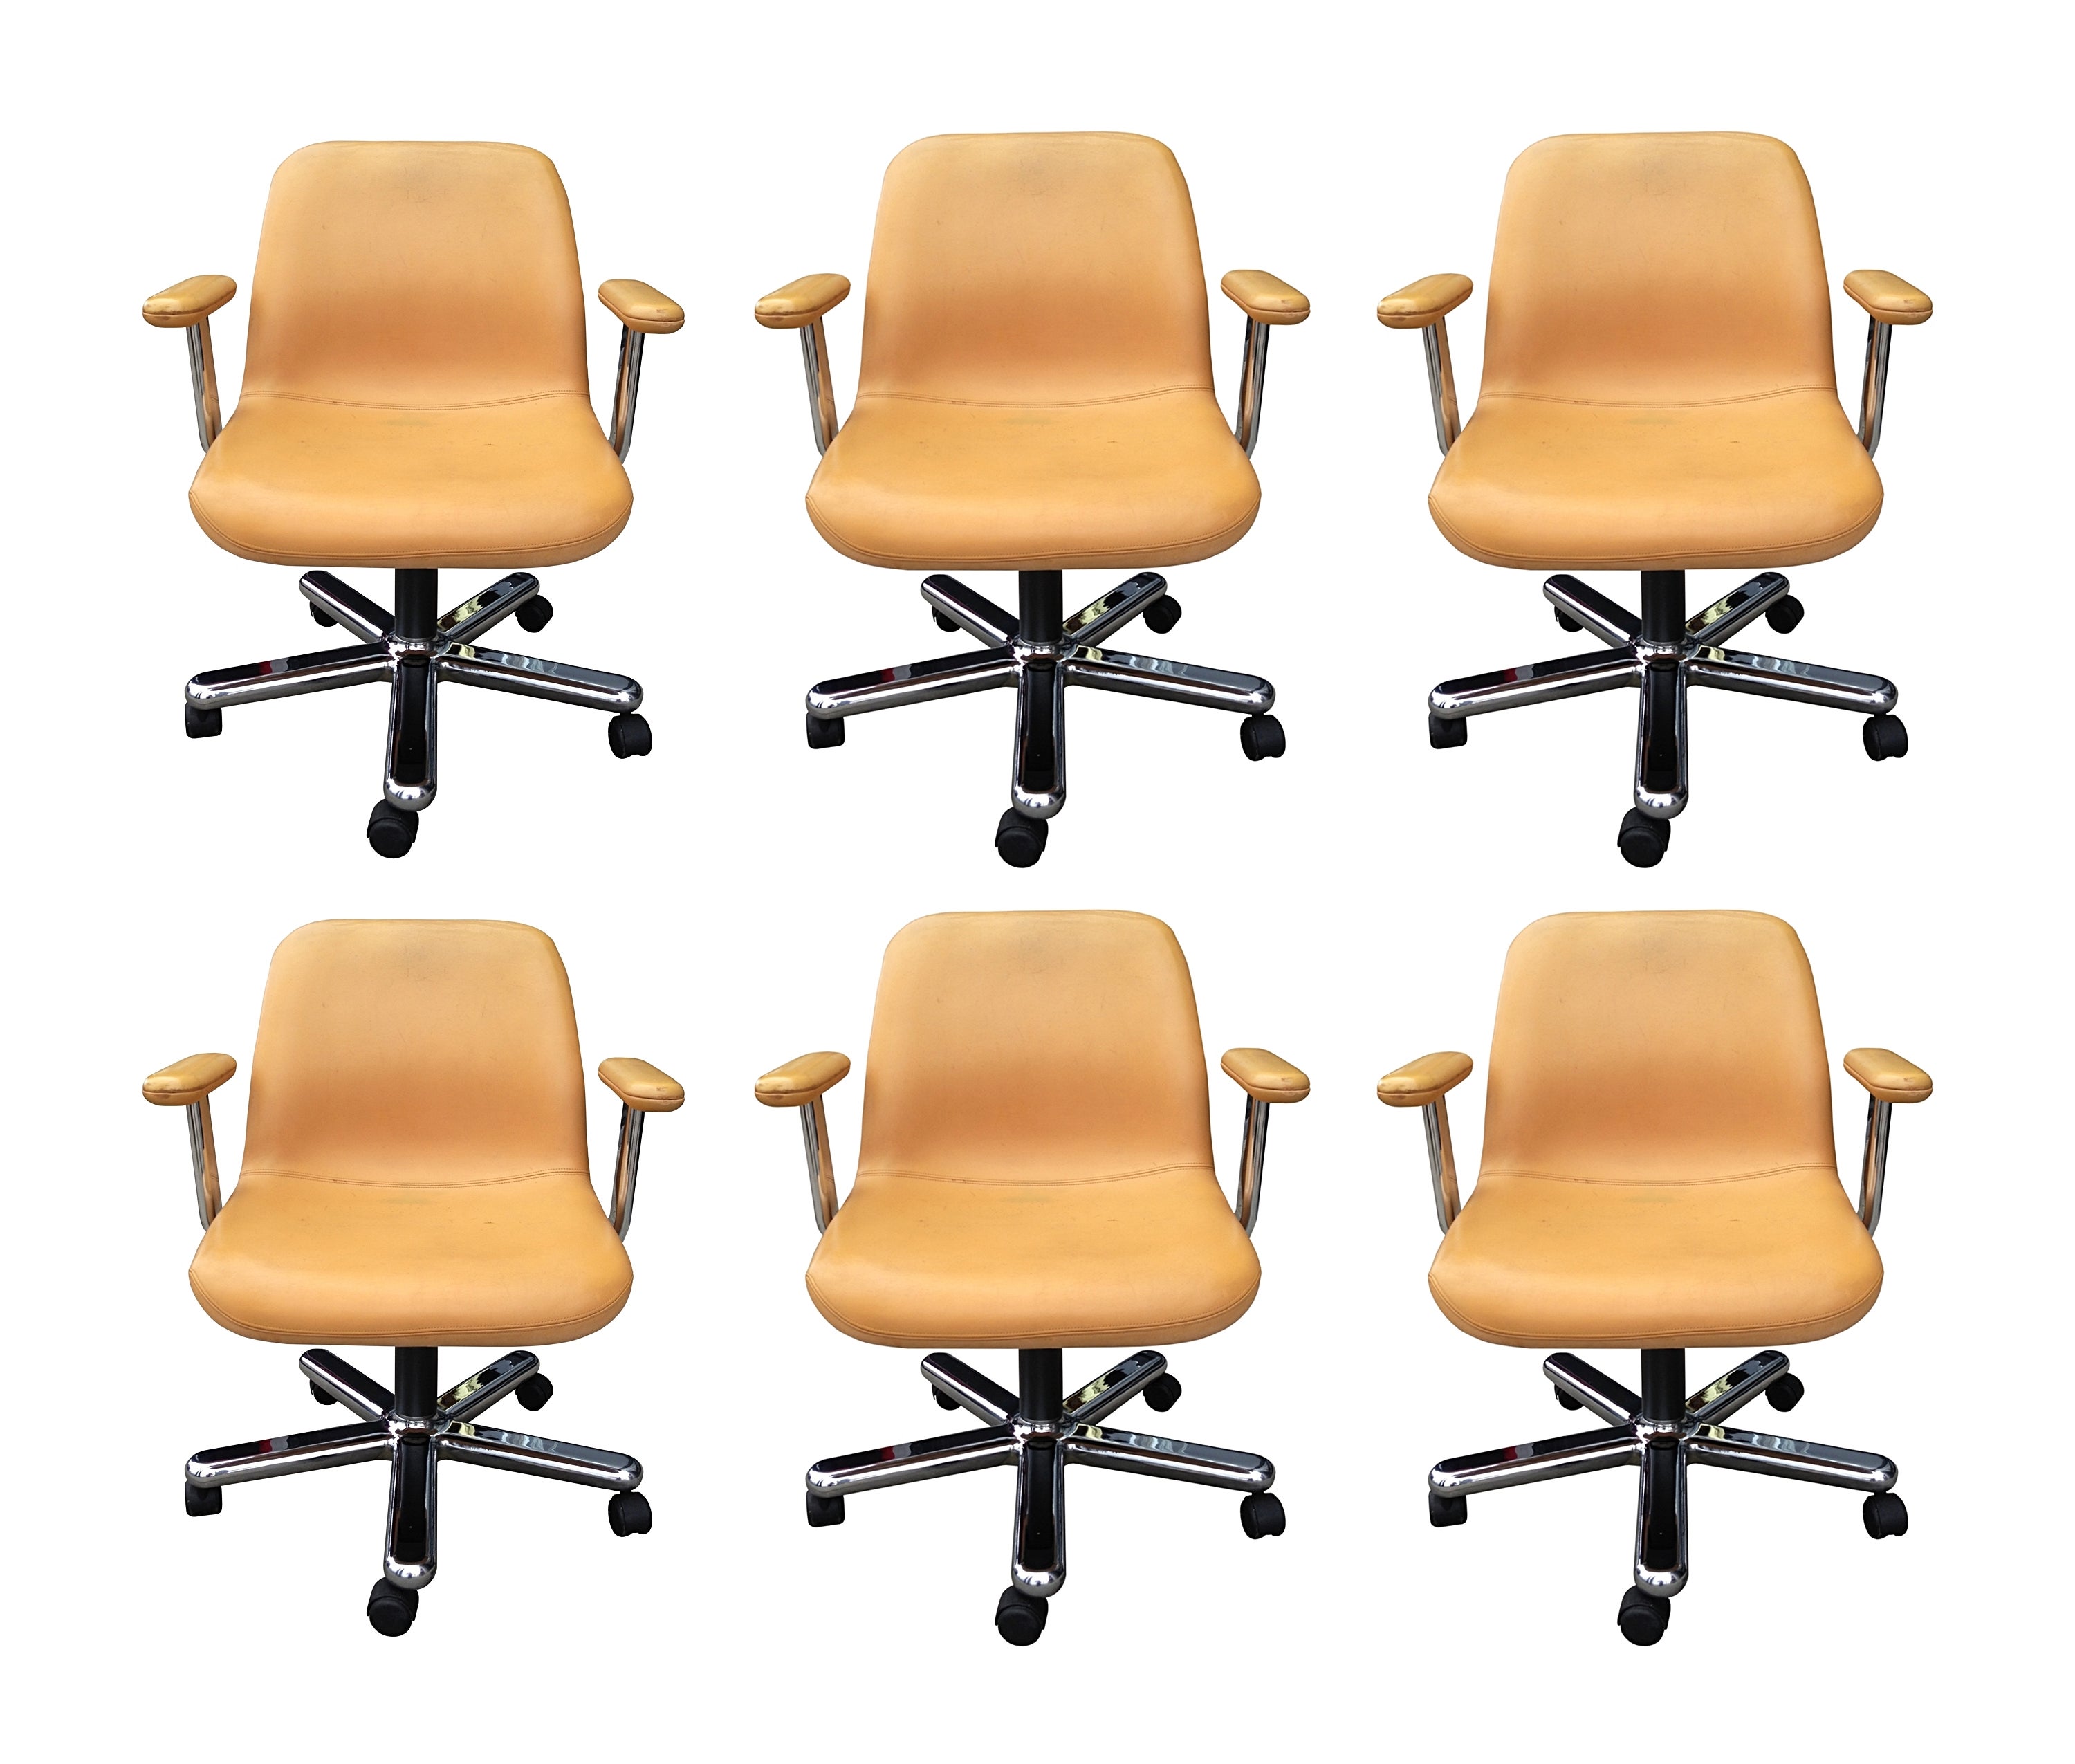 Set of 6 Executive Leather Chairs by Neils Diffrient for Knoll